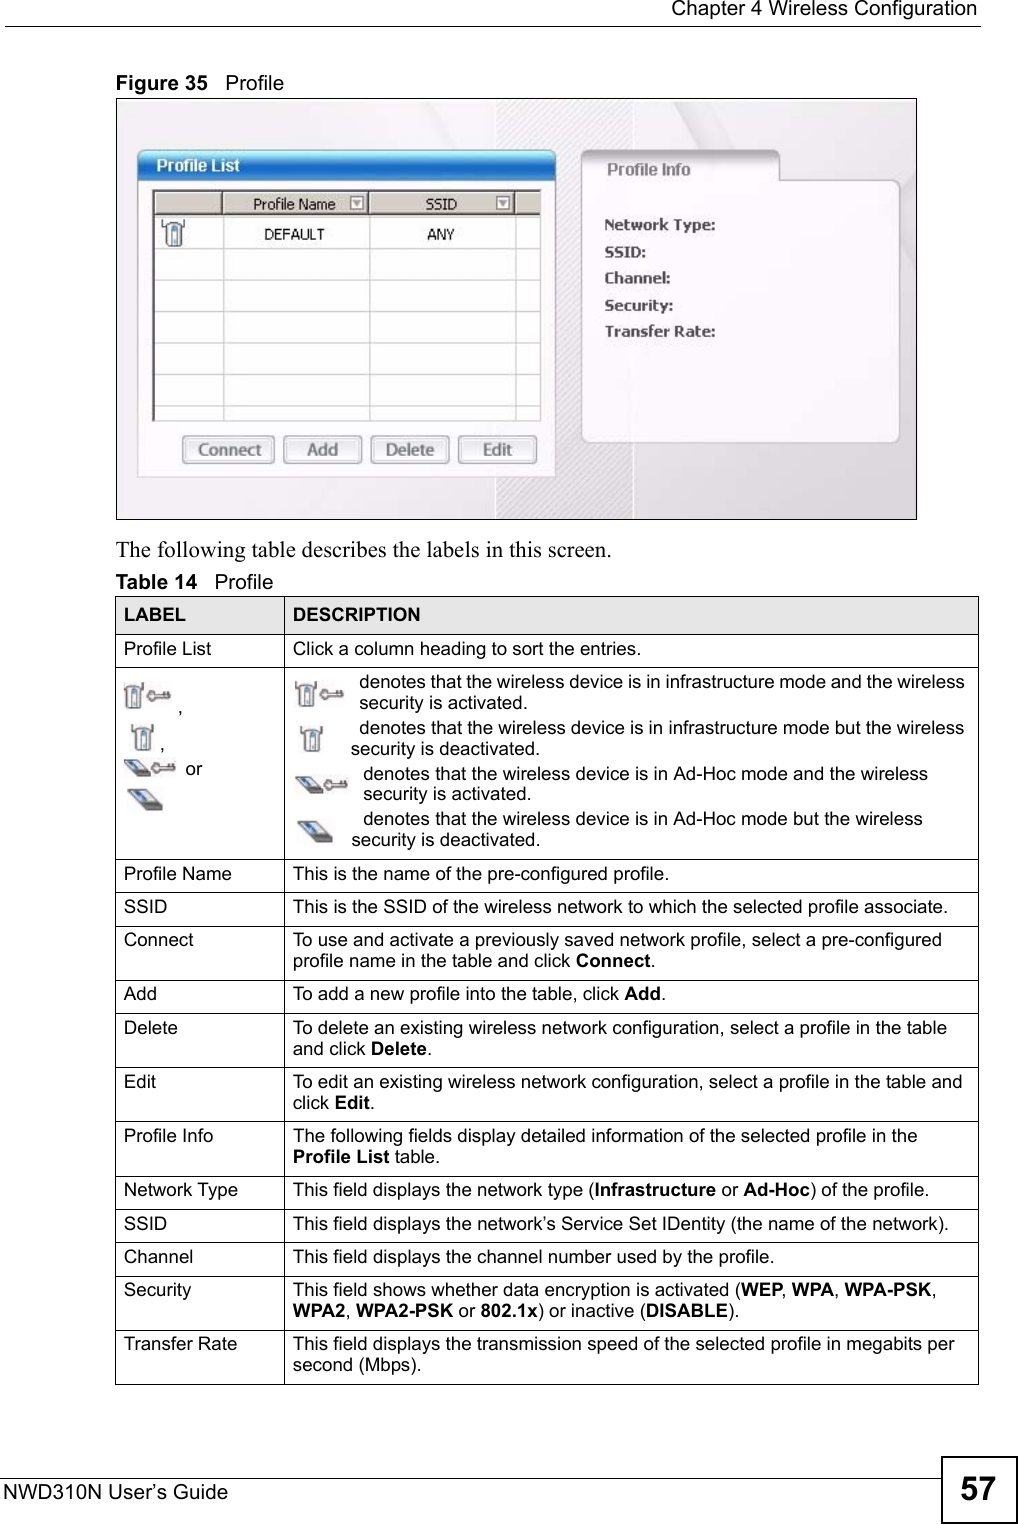  Chapter 4 Wireless ConfigurationNWD310N User’s Guide 57Figure 35   Profile  The following table describes the labels in this screen. Table 14   Profile LABEL DESCRIPTIONProfile List Click a column heading to sort the entries.,, ordenotes that the wireless device is in infrastructure mode and the wireless security is activated.denotes that the wireless device is in infrastructure mode but the wireless security is deactivated.denotes that the wireless device is in Ad-Hoc mode and the wireless security is activated.denotes that the wireless device is in Ad-Hoc mode but the wireless security is deactivated.Profile Name This is the name of the pre-configured profile.SSID This is the SSID of the wireless network to which the selected profile associate.Connect  To use and activate a previously saved network profile, select a pre-configured profile name in the table and click Connect.Add  To add a new profile into the table, click Add.Delete To delete an existing wireless network configuration, select a profile in the table and click Delete.Edit To edit an existing wireless network configuration, select a profile in the table and click Edit.Profile Info The following fields display detailed information of the selected profile in the Profile List table.Network Type This field displays the network type (Infrastructure or Ad-Hoc) of the profile.SSID This field displays the network’s Service Set IDentity (the name of the network).Channel This field displays the channel number used by the profile.Security This field shows whether data encryption is activated (WEP, WPA, WPA-PSK, WPA2, WPA2-PSK or 802.1x) or inactive (DISABLE).Transfer Rate This field displays the transmission speed of the selected profile in megabits per second (Mbps).